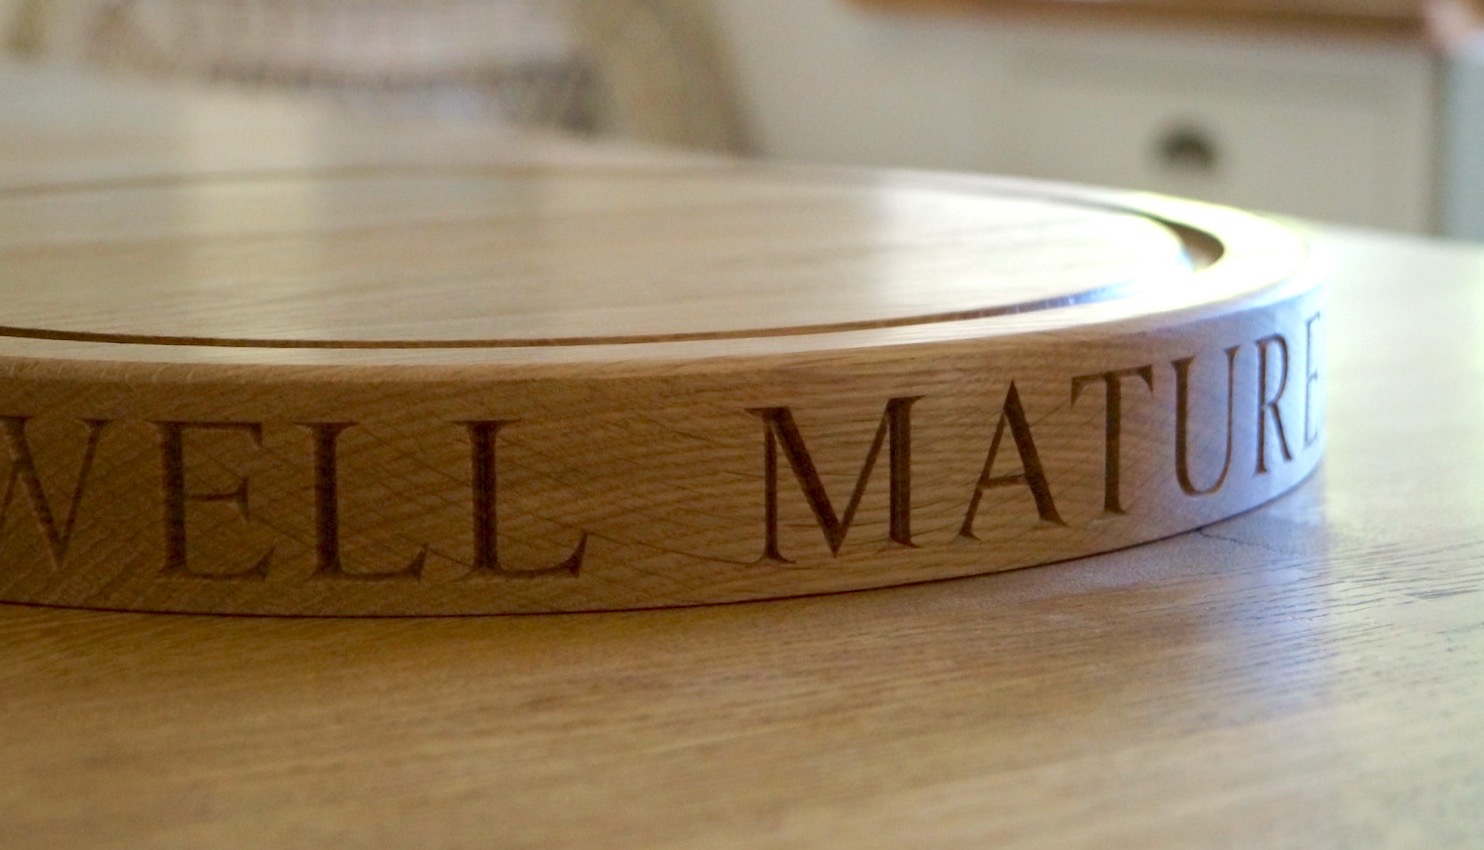 oak-cheese-board-with-engraving-makemesomethingspecial.com